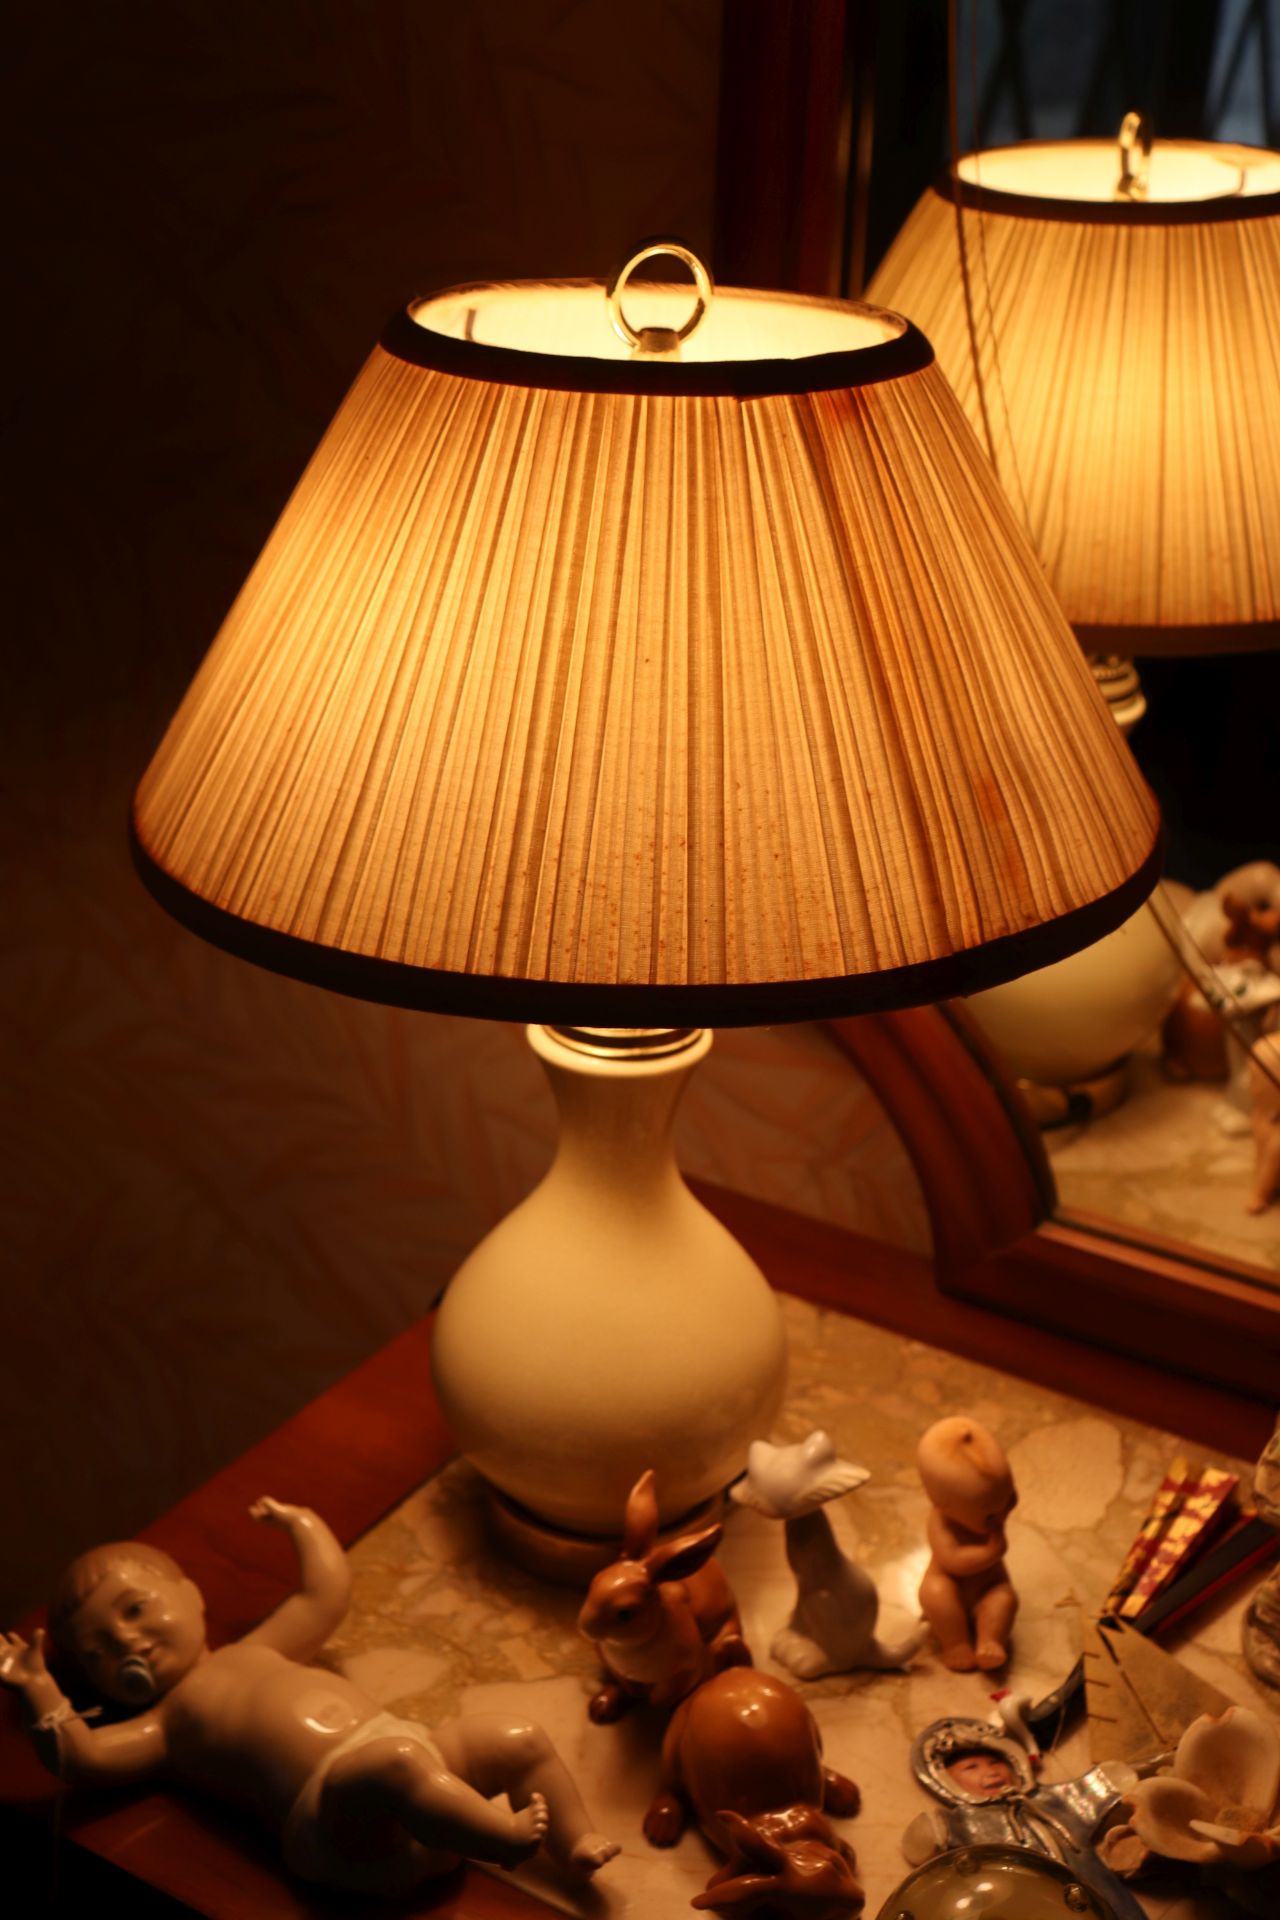 Pair of table lamps, height 18" - Image 2 of 2